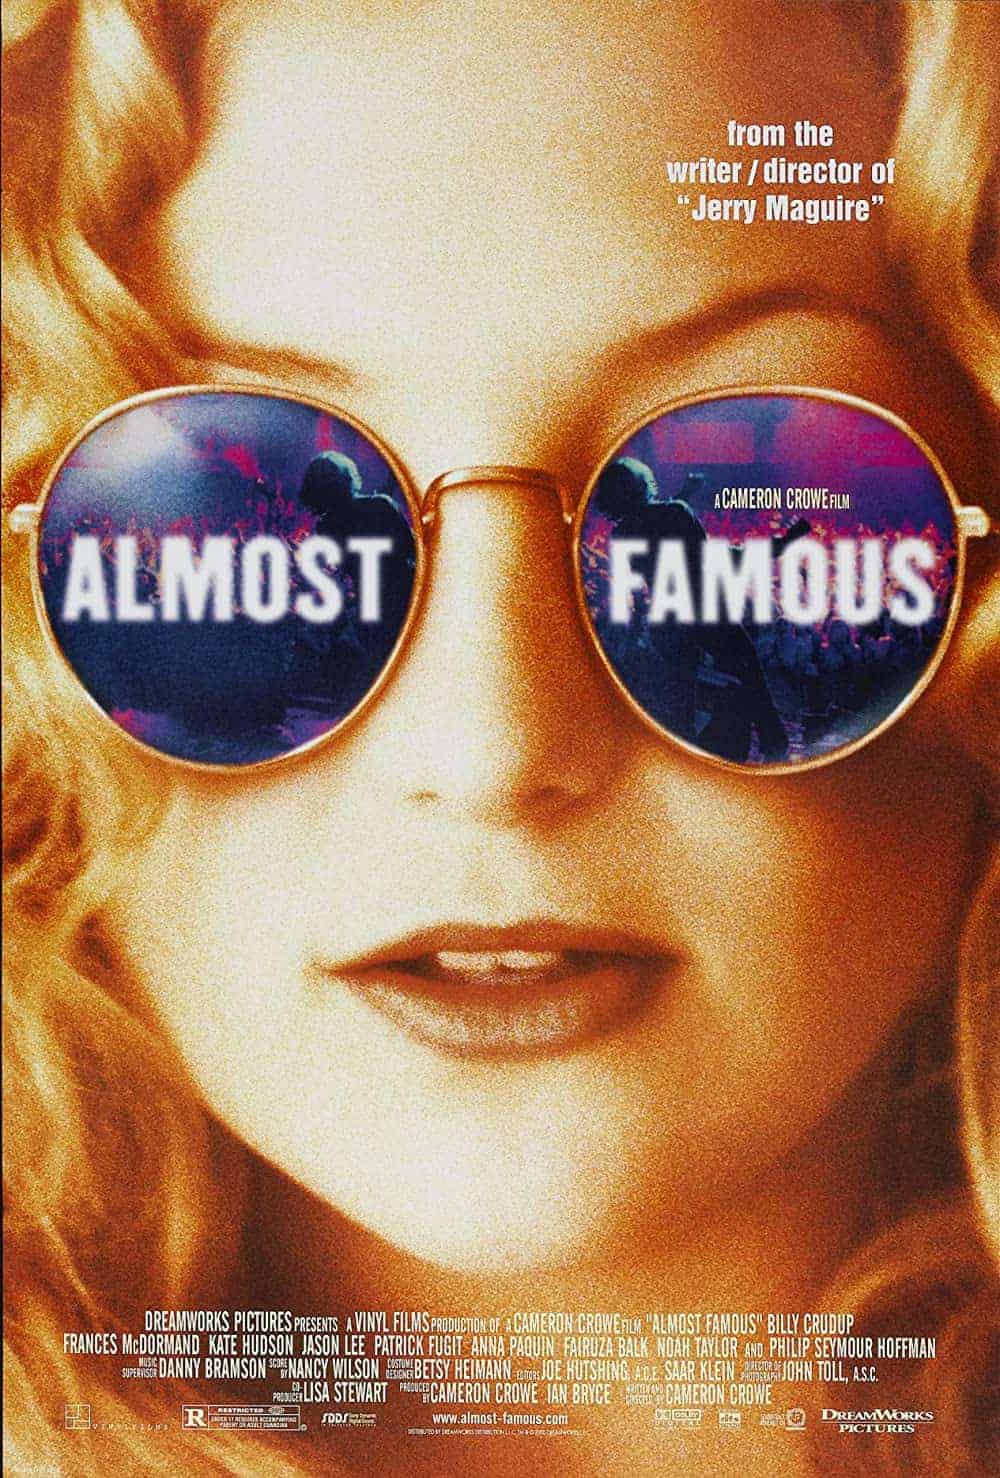 Almost Famous (2000) Best Rock Movies to Watch